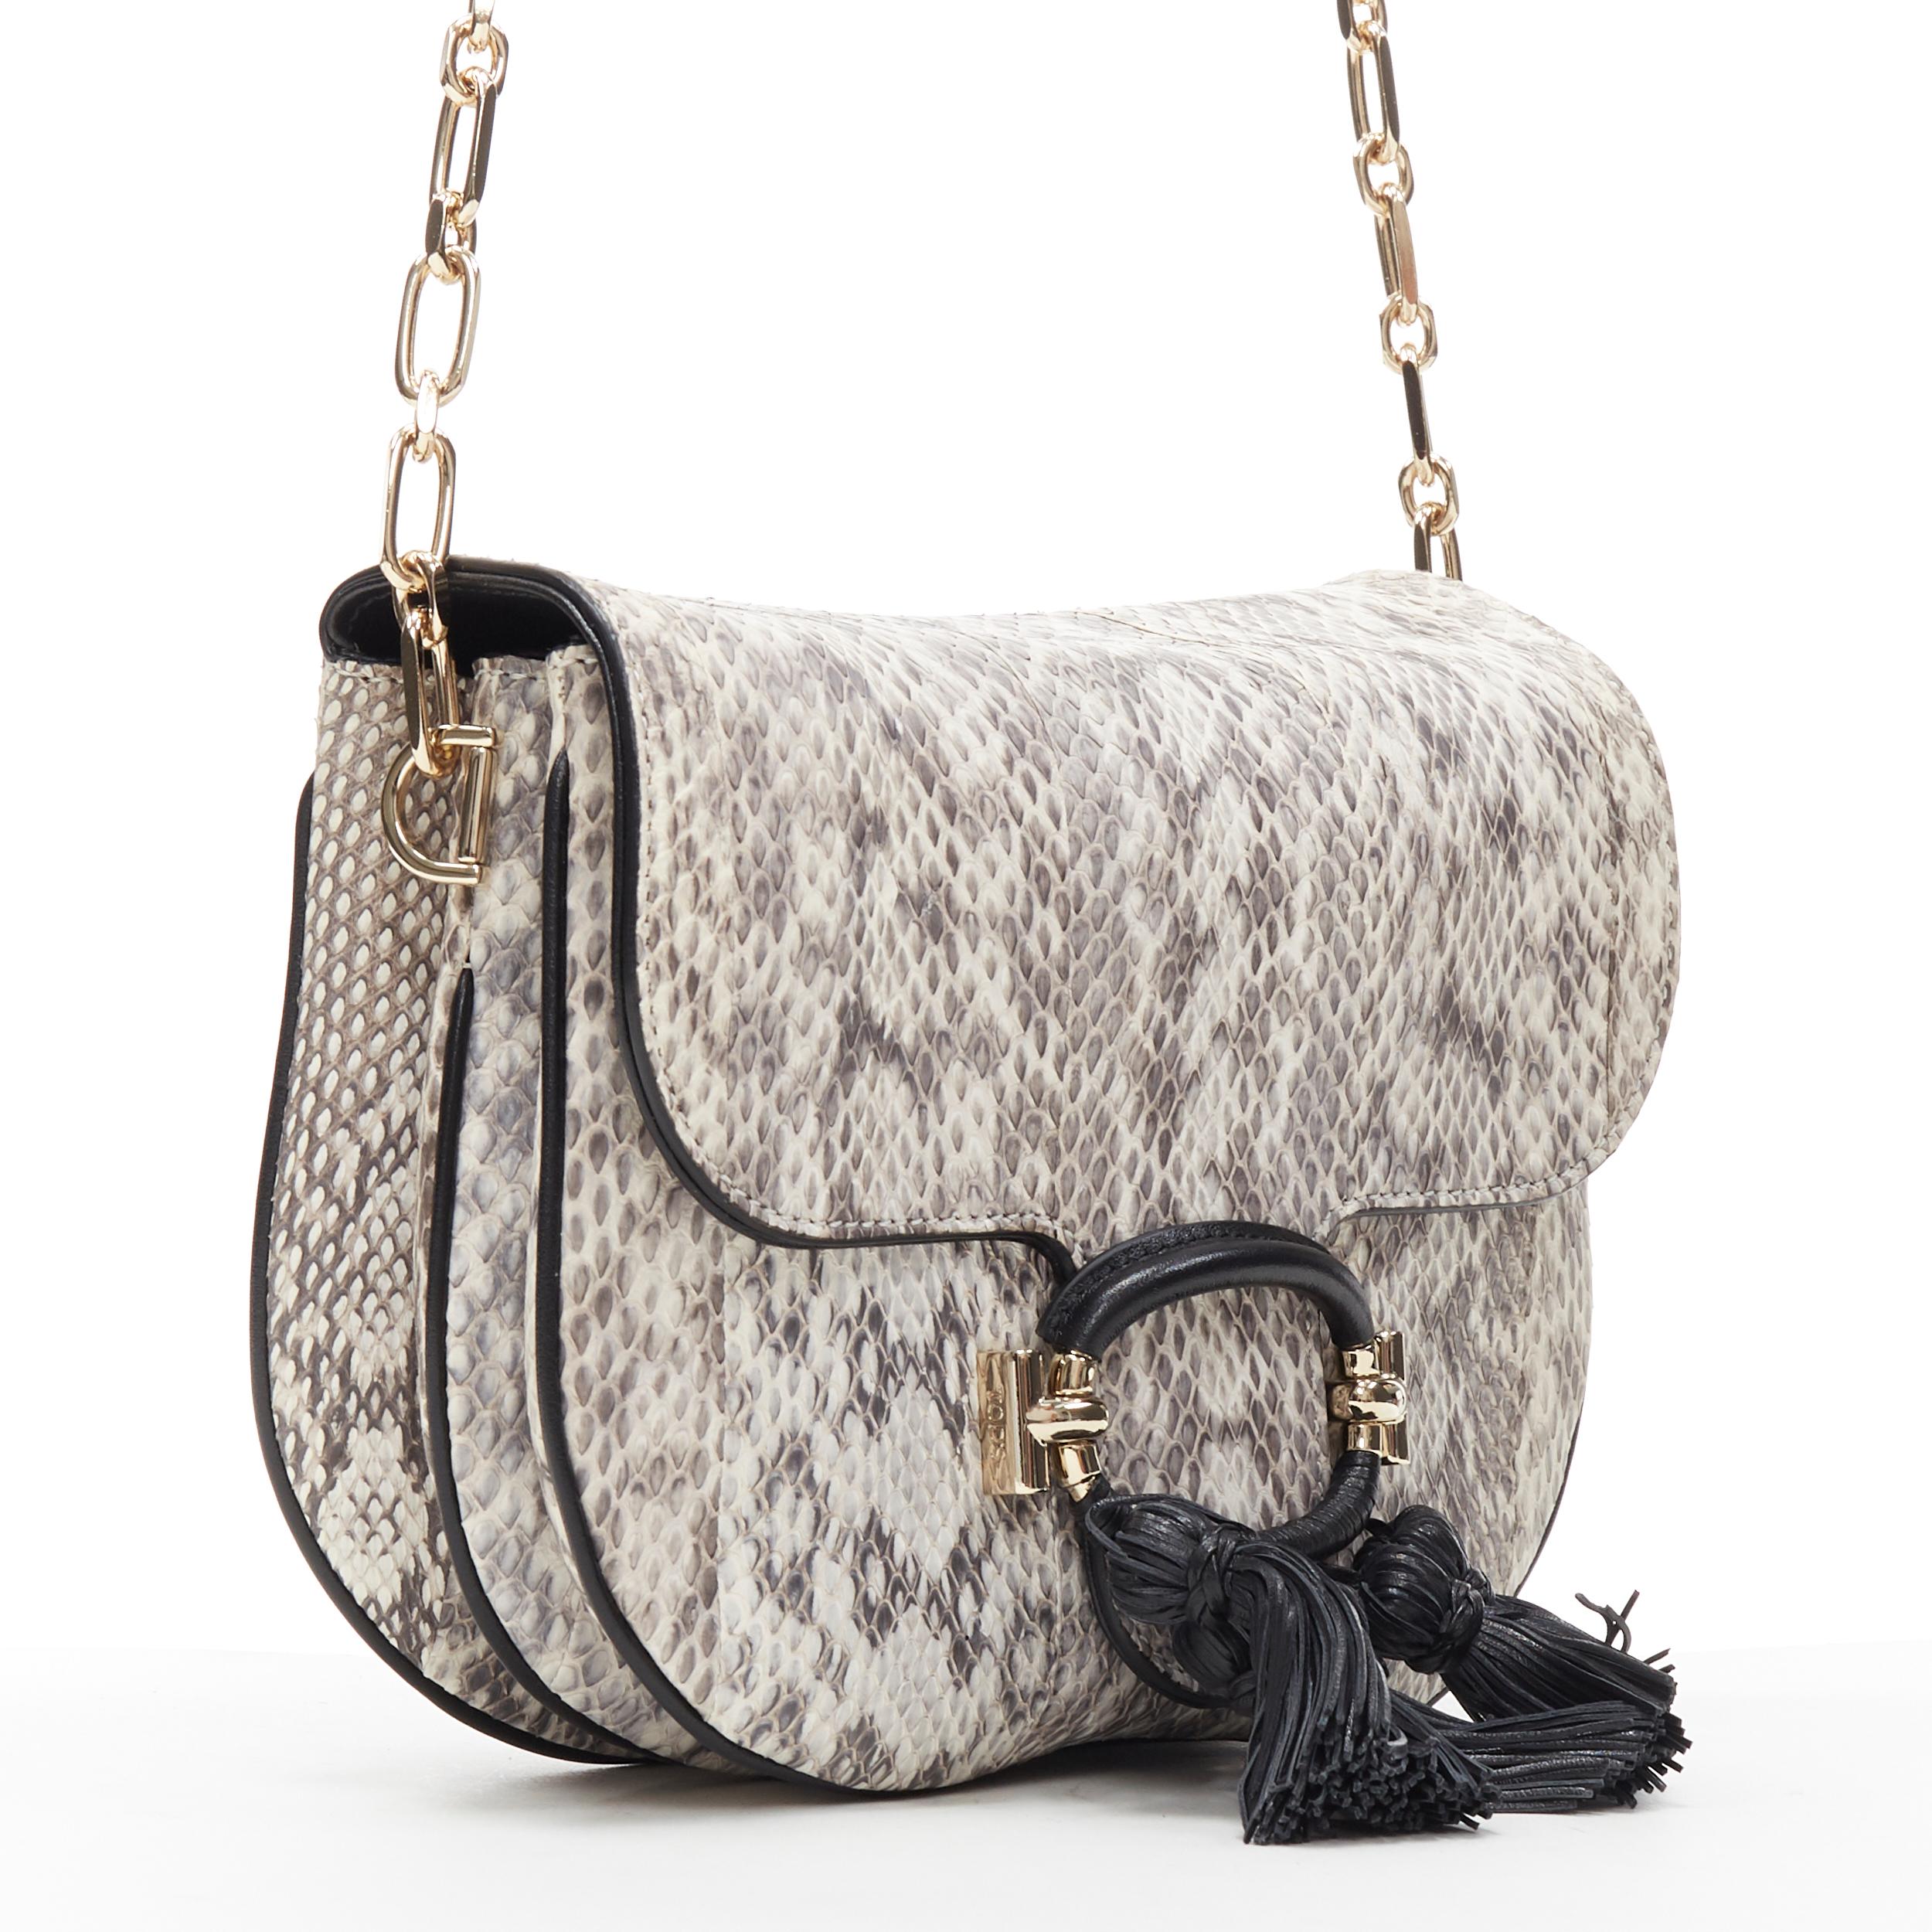 new TOD'S T-Ring Mini grey scaled leather black tassel gold chain crossbody bag
Brand: Tod's
Model Name / Style: Crossbody bag
Material: Leather
Color: Grey
Pattern: Solid
Extra Detail: Genuine leather. Black buckle detail. Tassel embellishment.